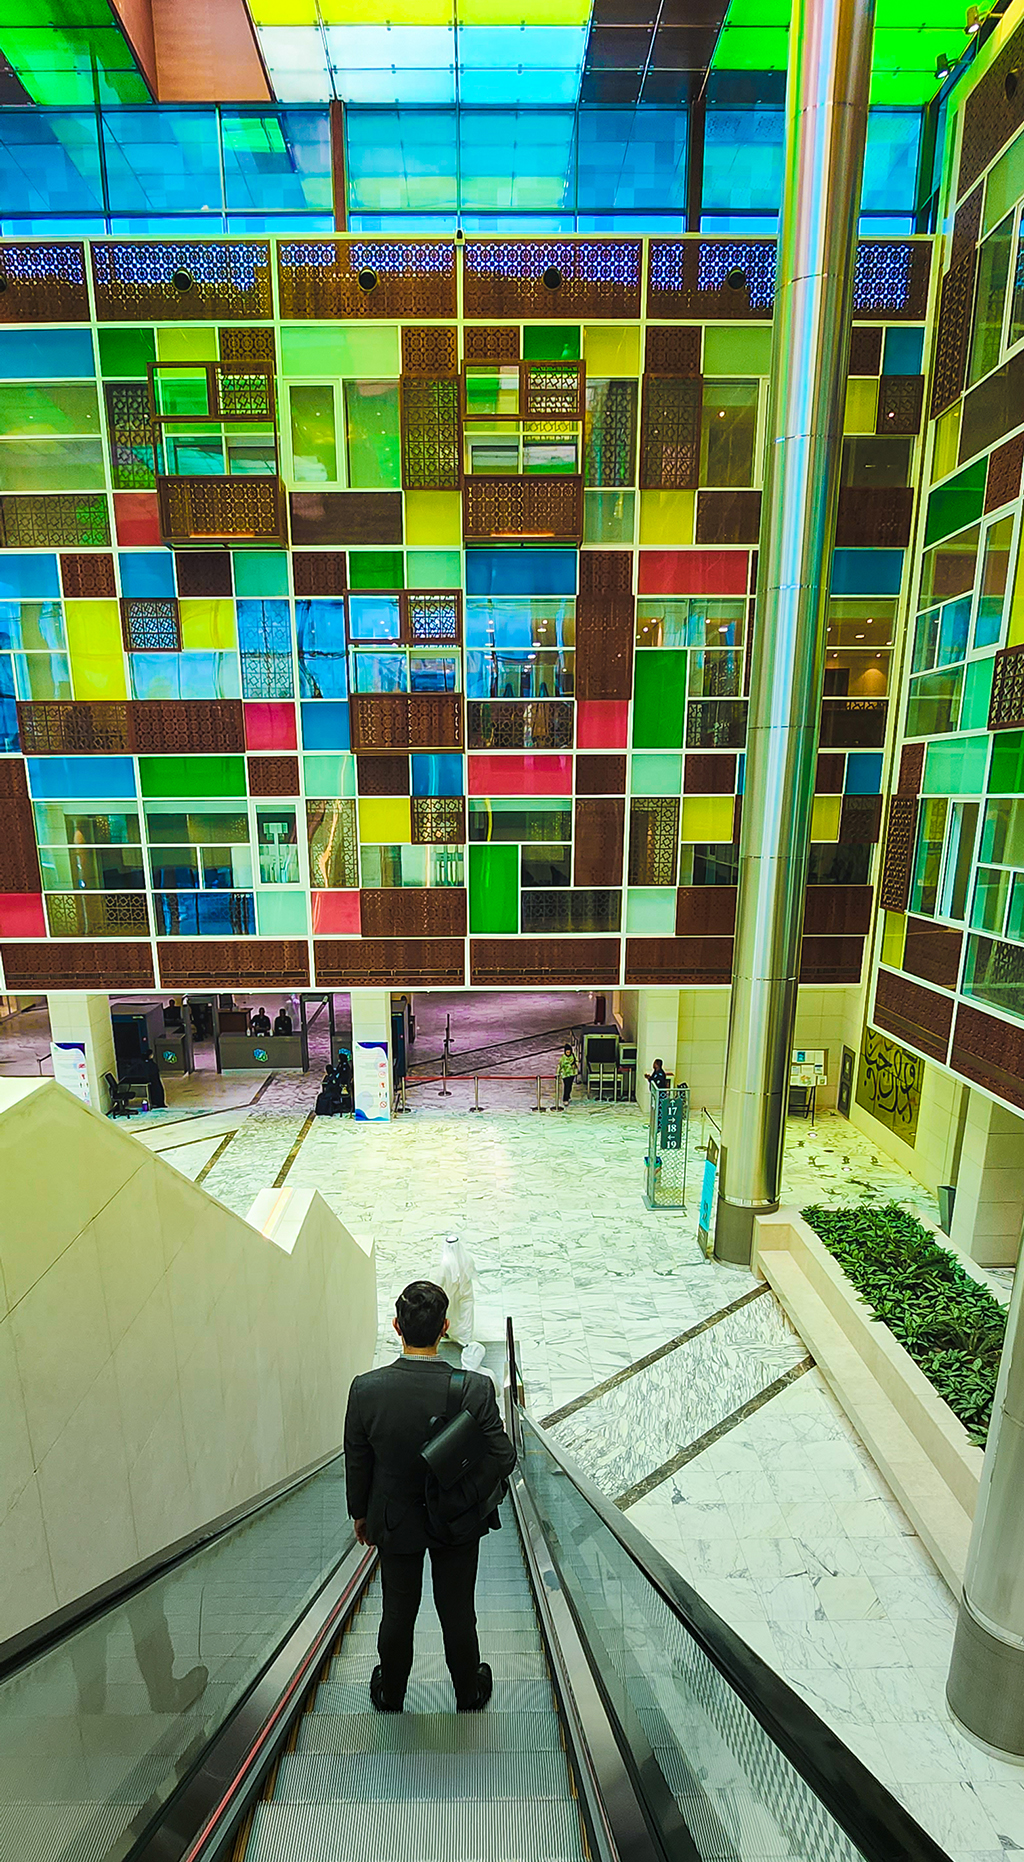 The use of colors inspired by Arabic Sadu on the walls inside the Ministries Complex.